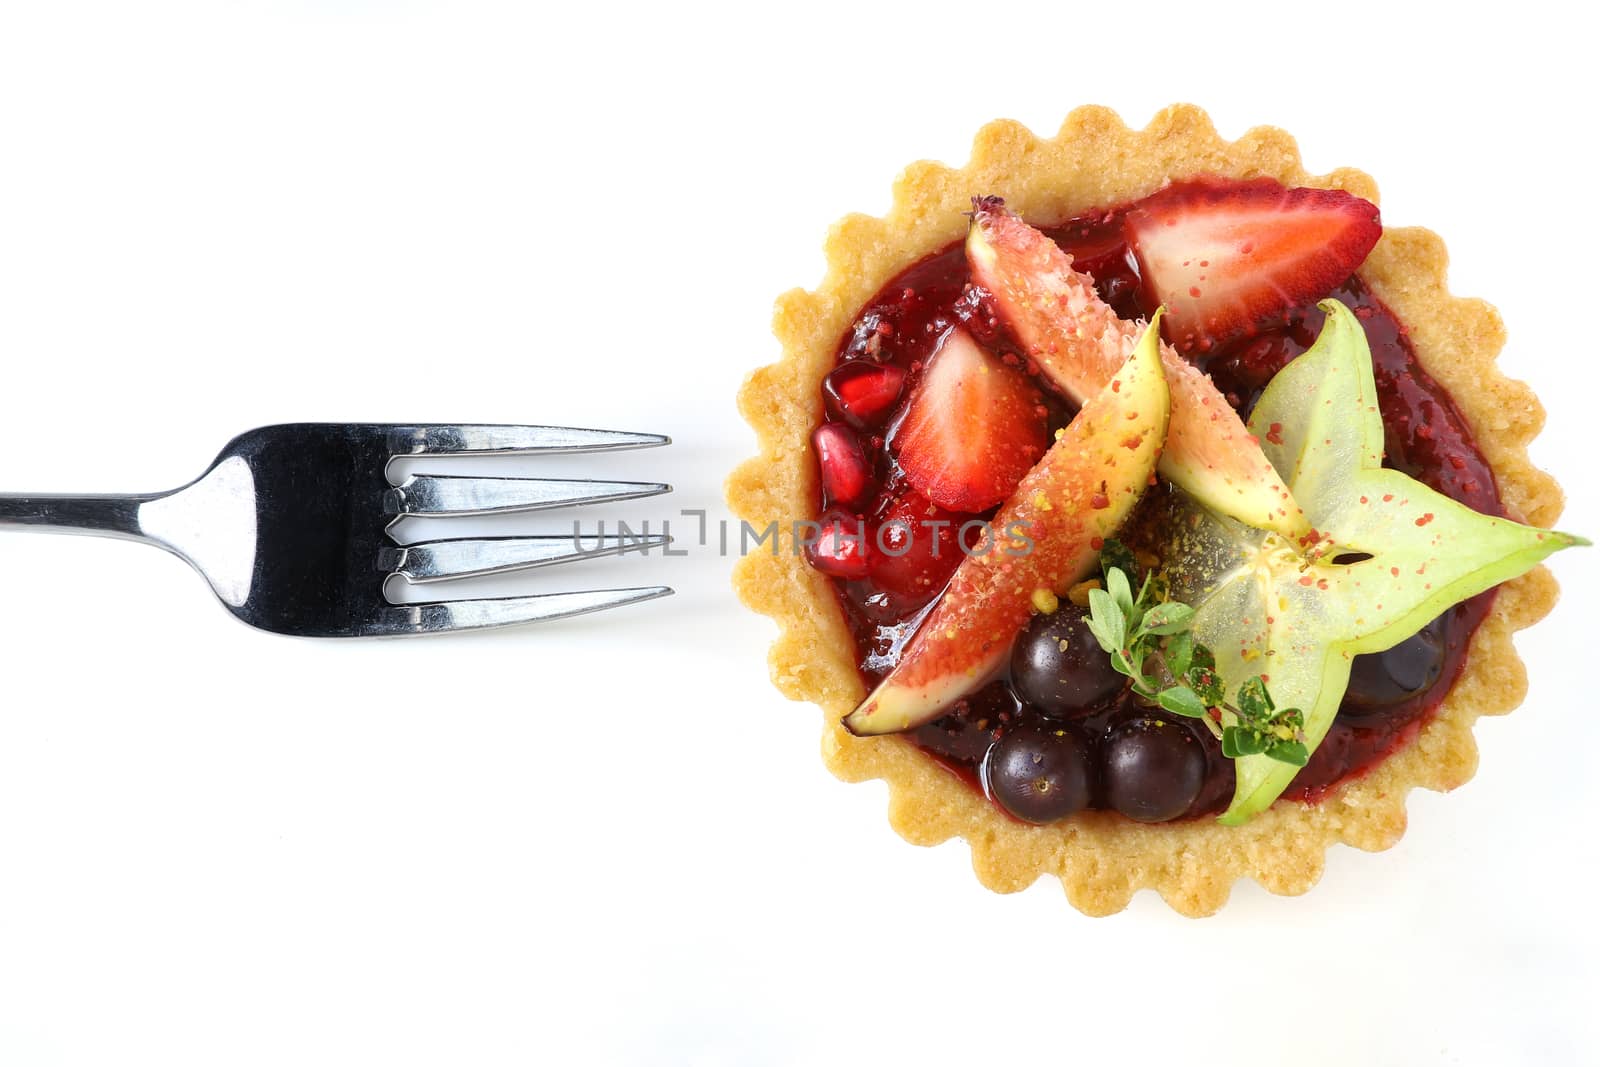 Mixed fruits tart with fig, pomegranate, starfruit, cherry, blueberry, grape, and raspberry jam. Isolated on white background, top view.